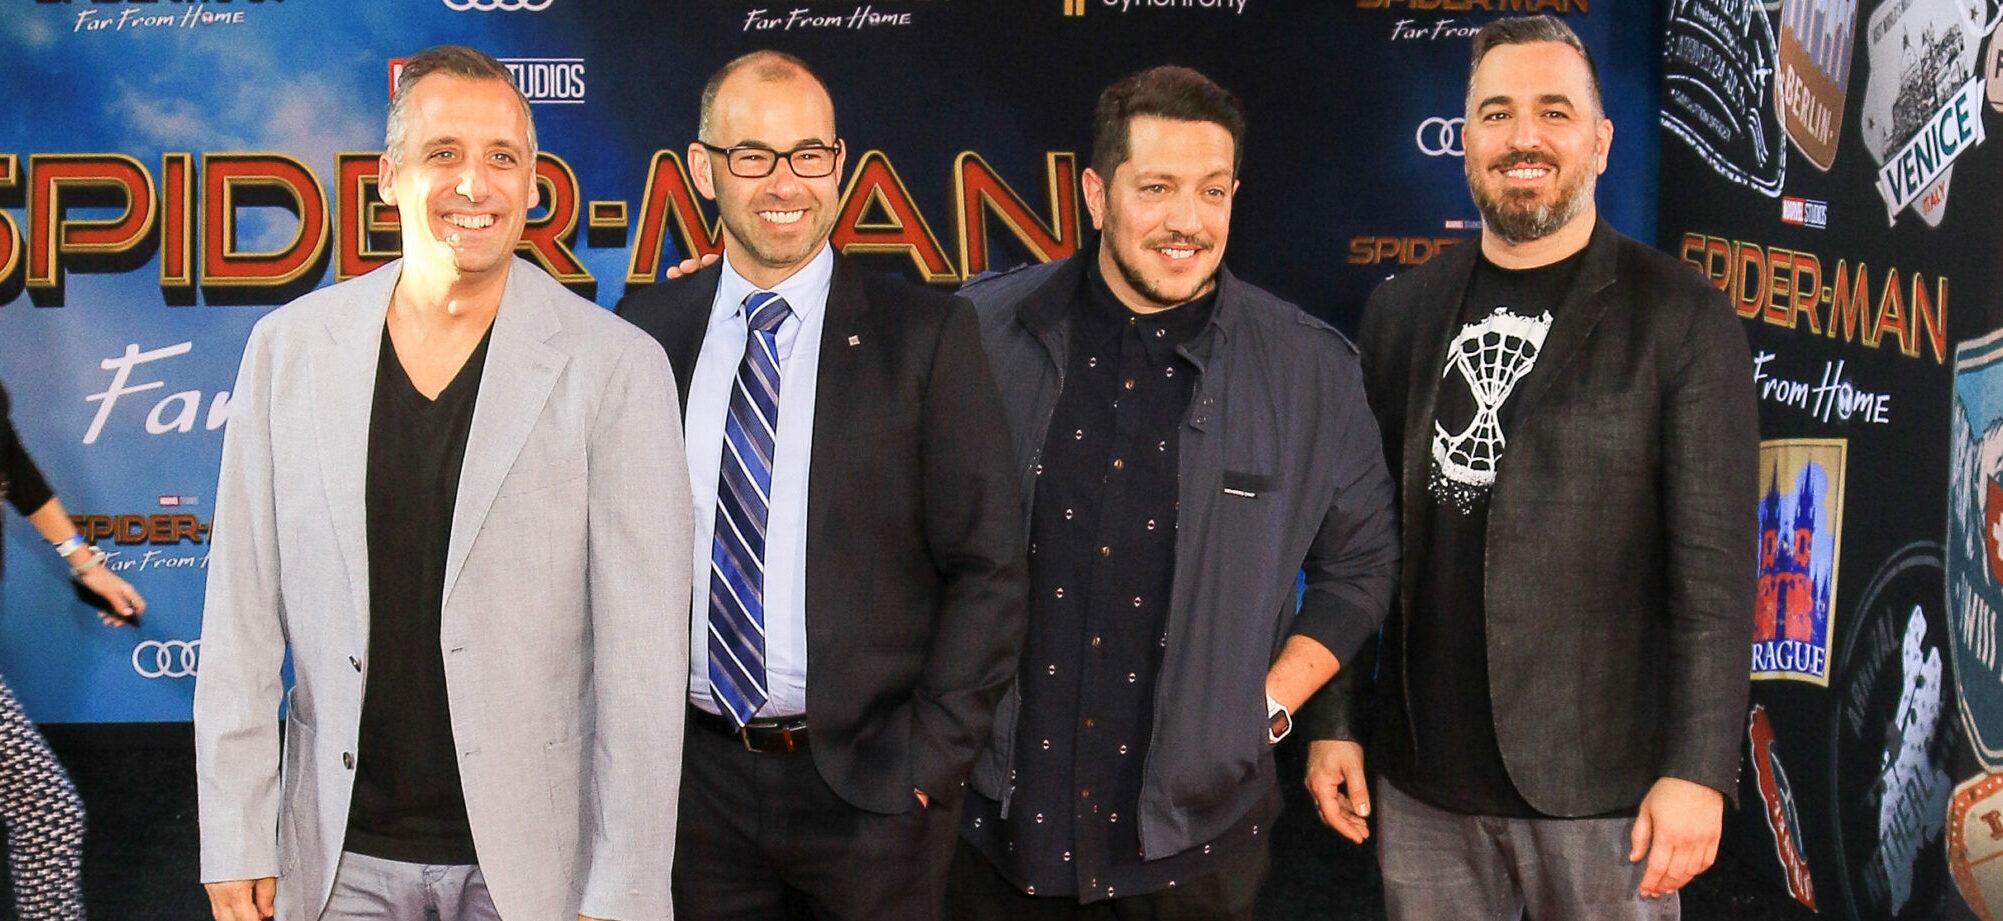 Premiere of Sony Pictures apos apos Spider-Man Far From Home apos